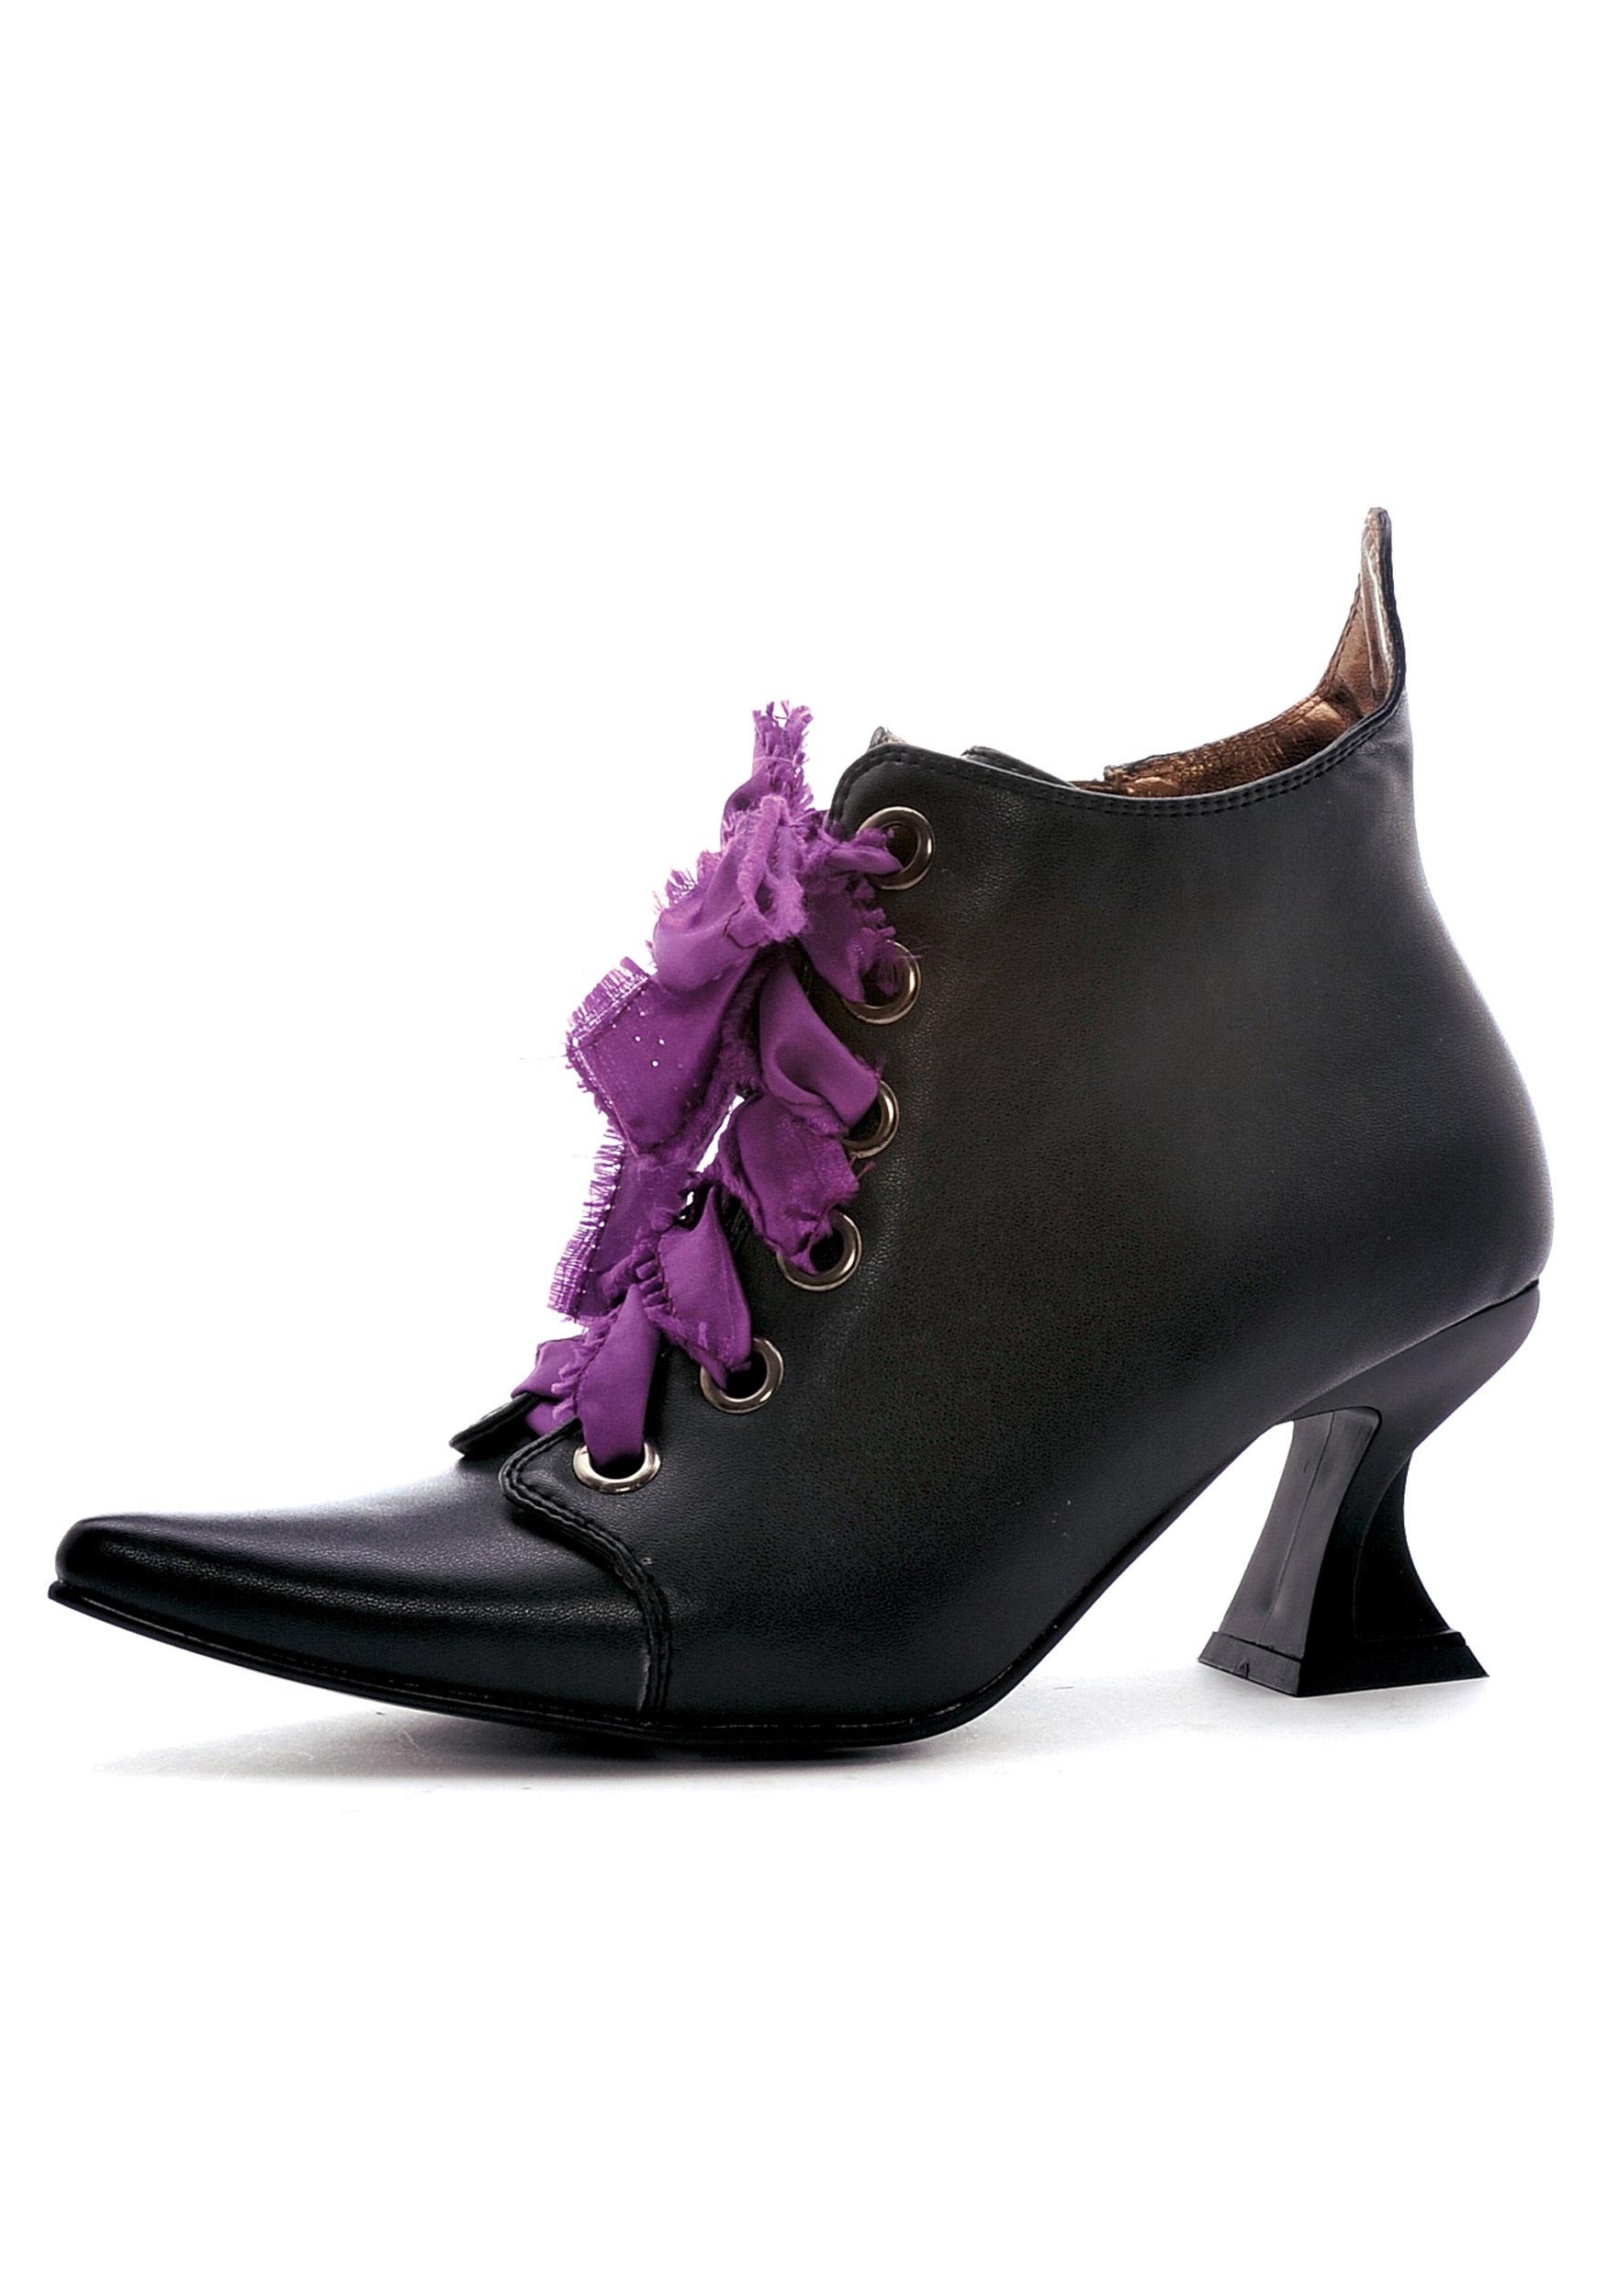 Lace Up Witches Shoes - Sanderson Sisters Costumes - Hocus Pocus - Mad Halloween